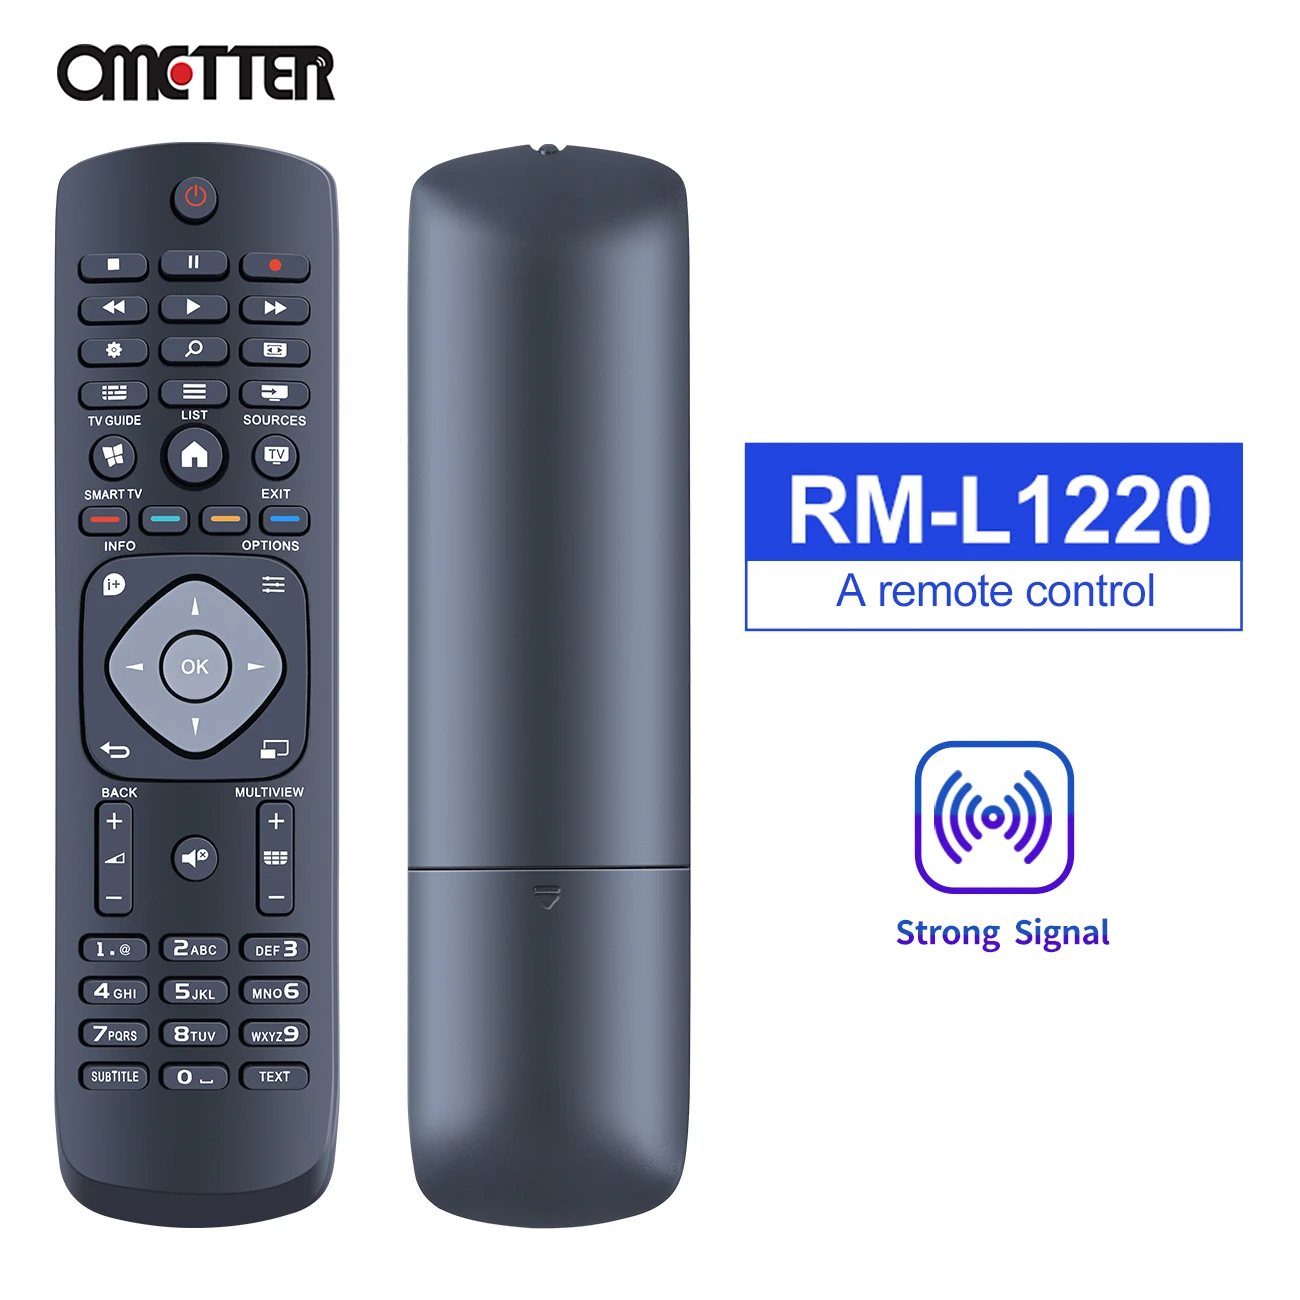 To meditation confusion fragrance Remote Control Philips | Philips New Tv Remote Control | Remot Control  Philips Tv - New - Aliexpress